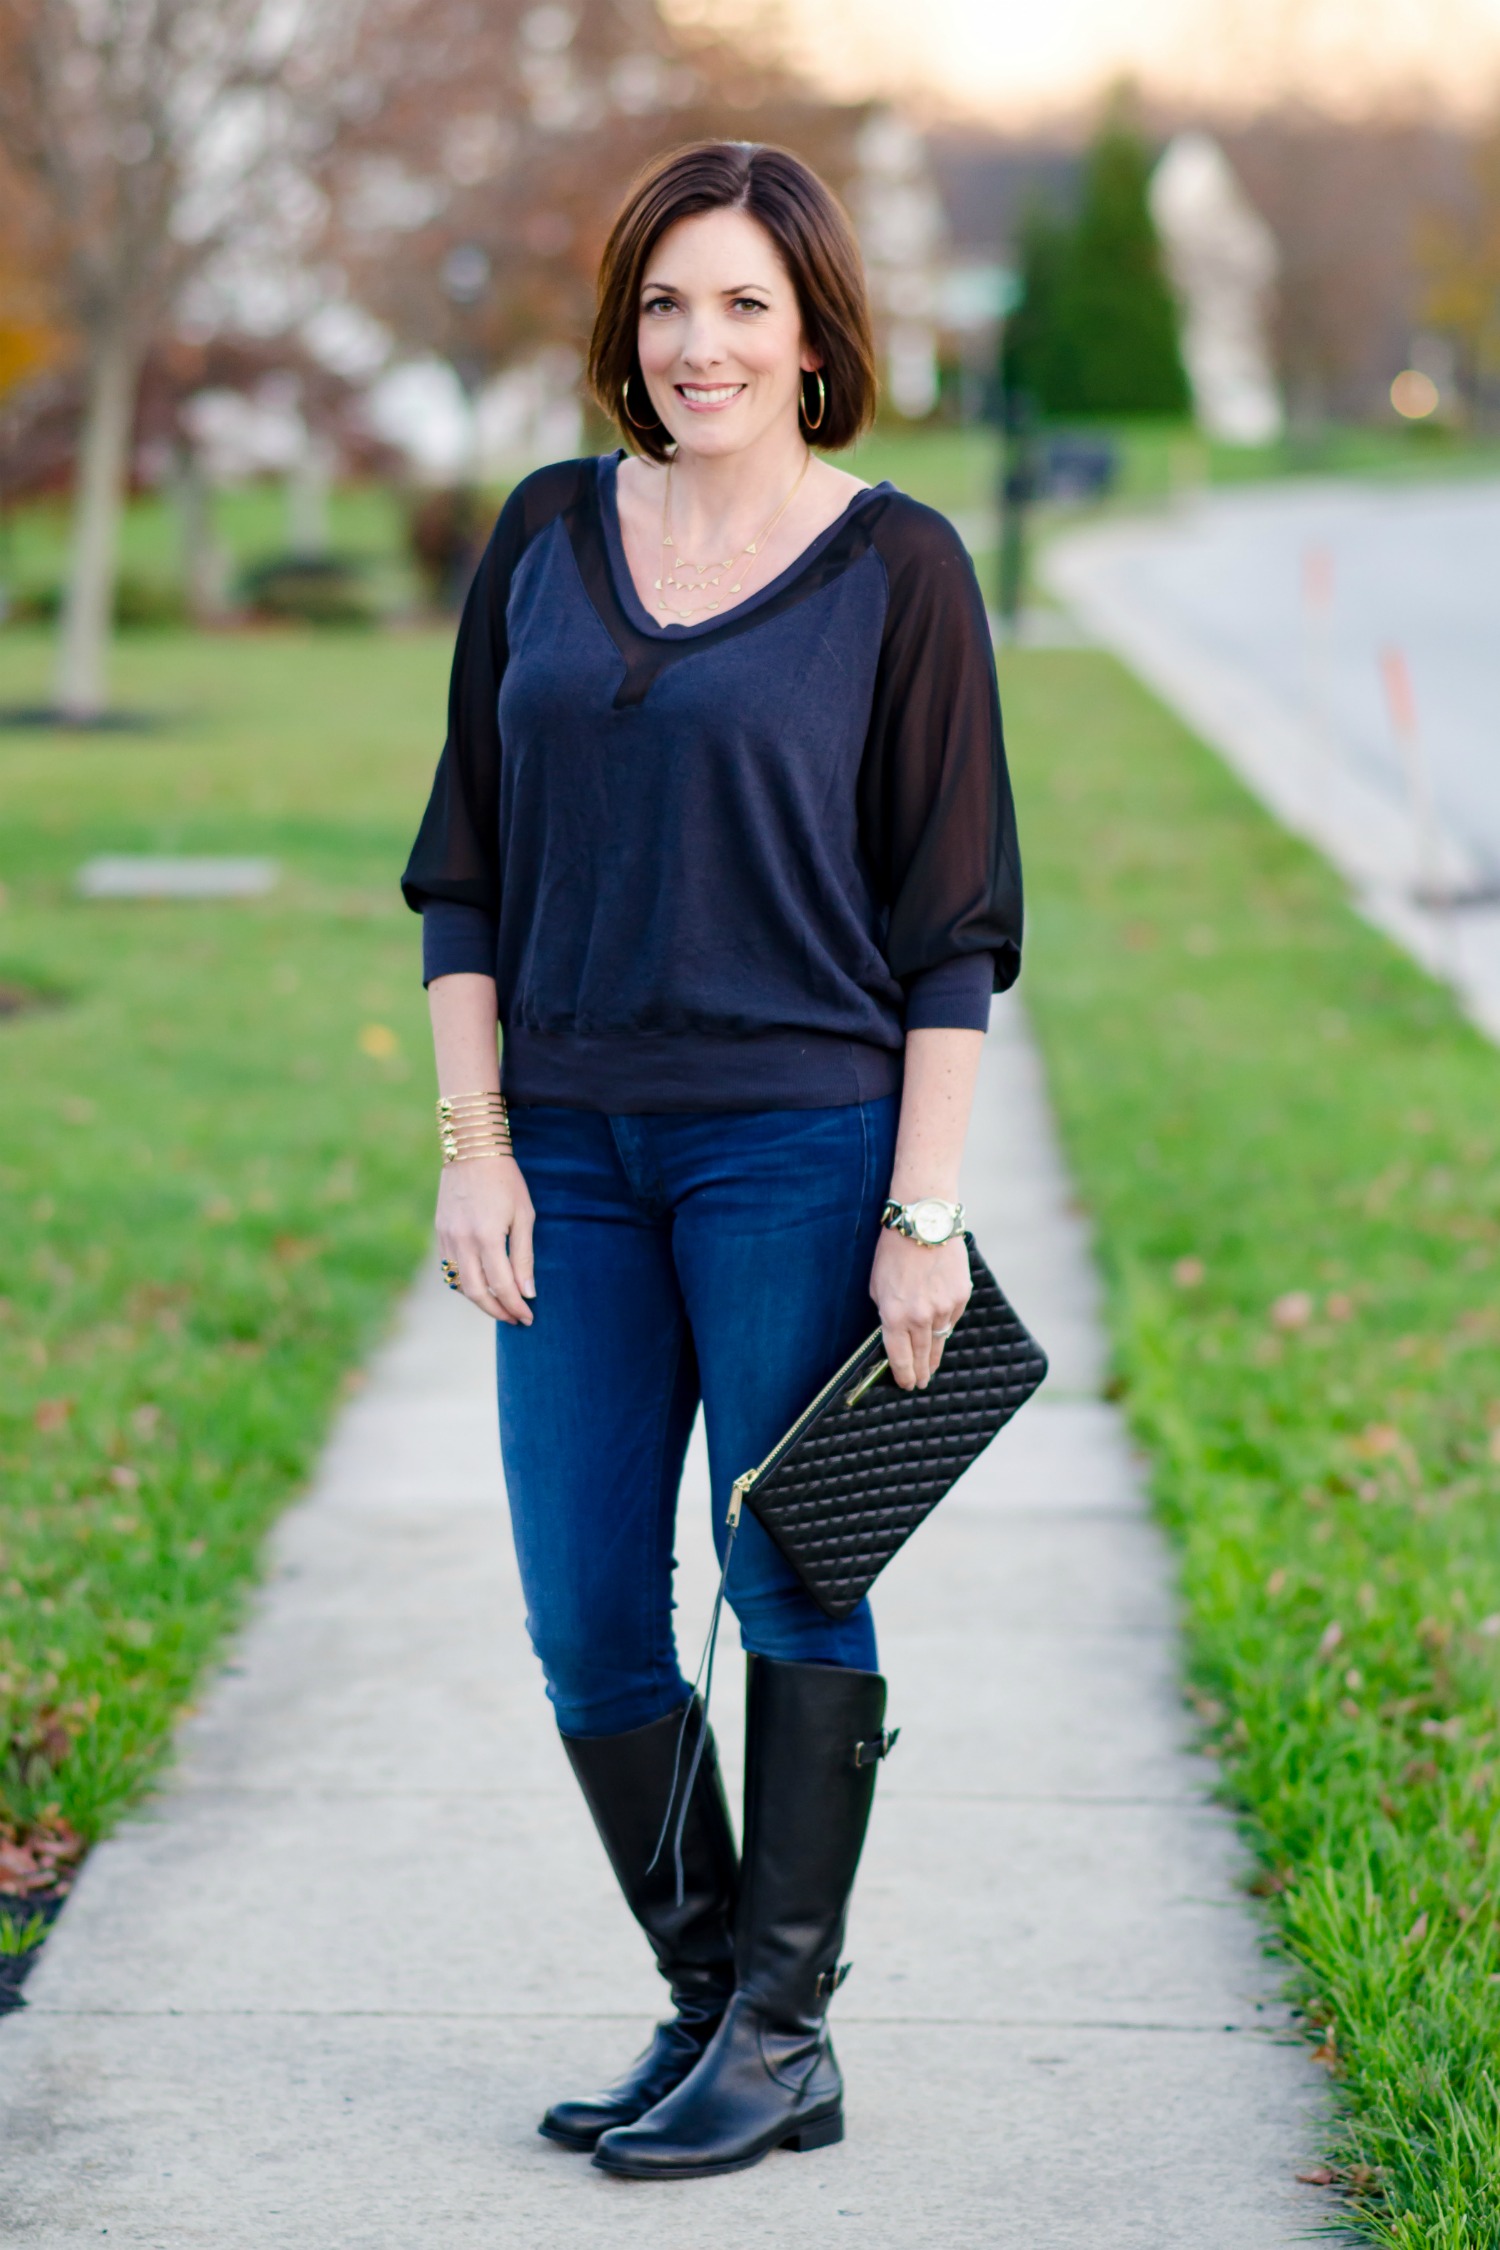 What I Wore: Date Night Outfit featuring black leather jacket, mixed media top from LeTote, skinny jeans, and riding boots